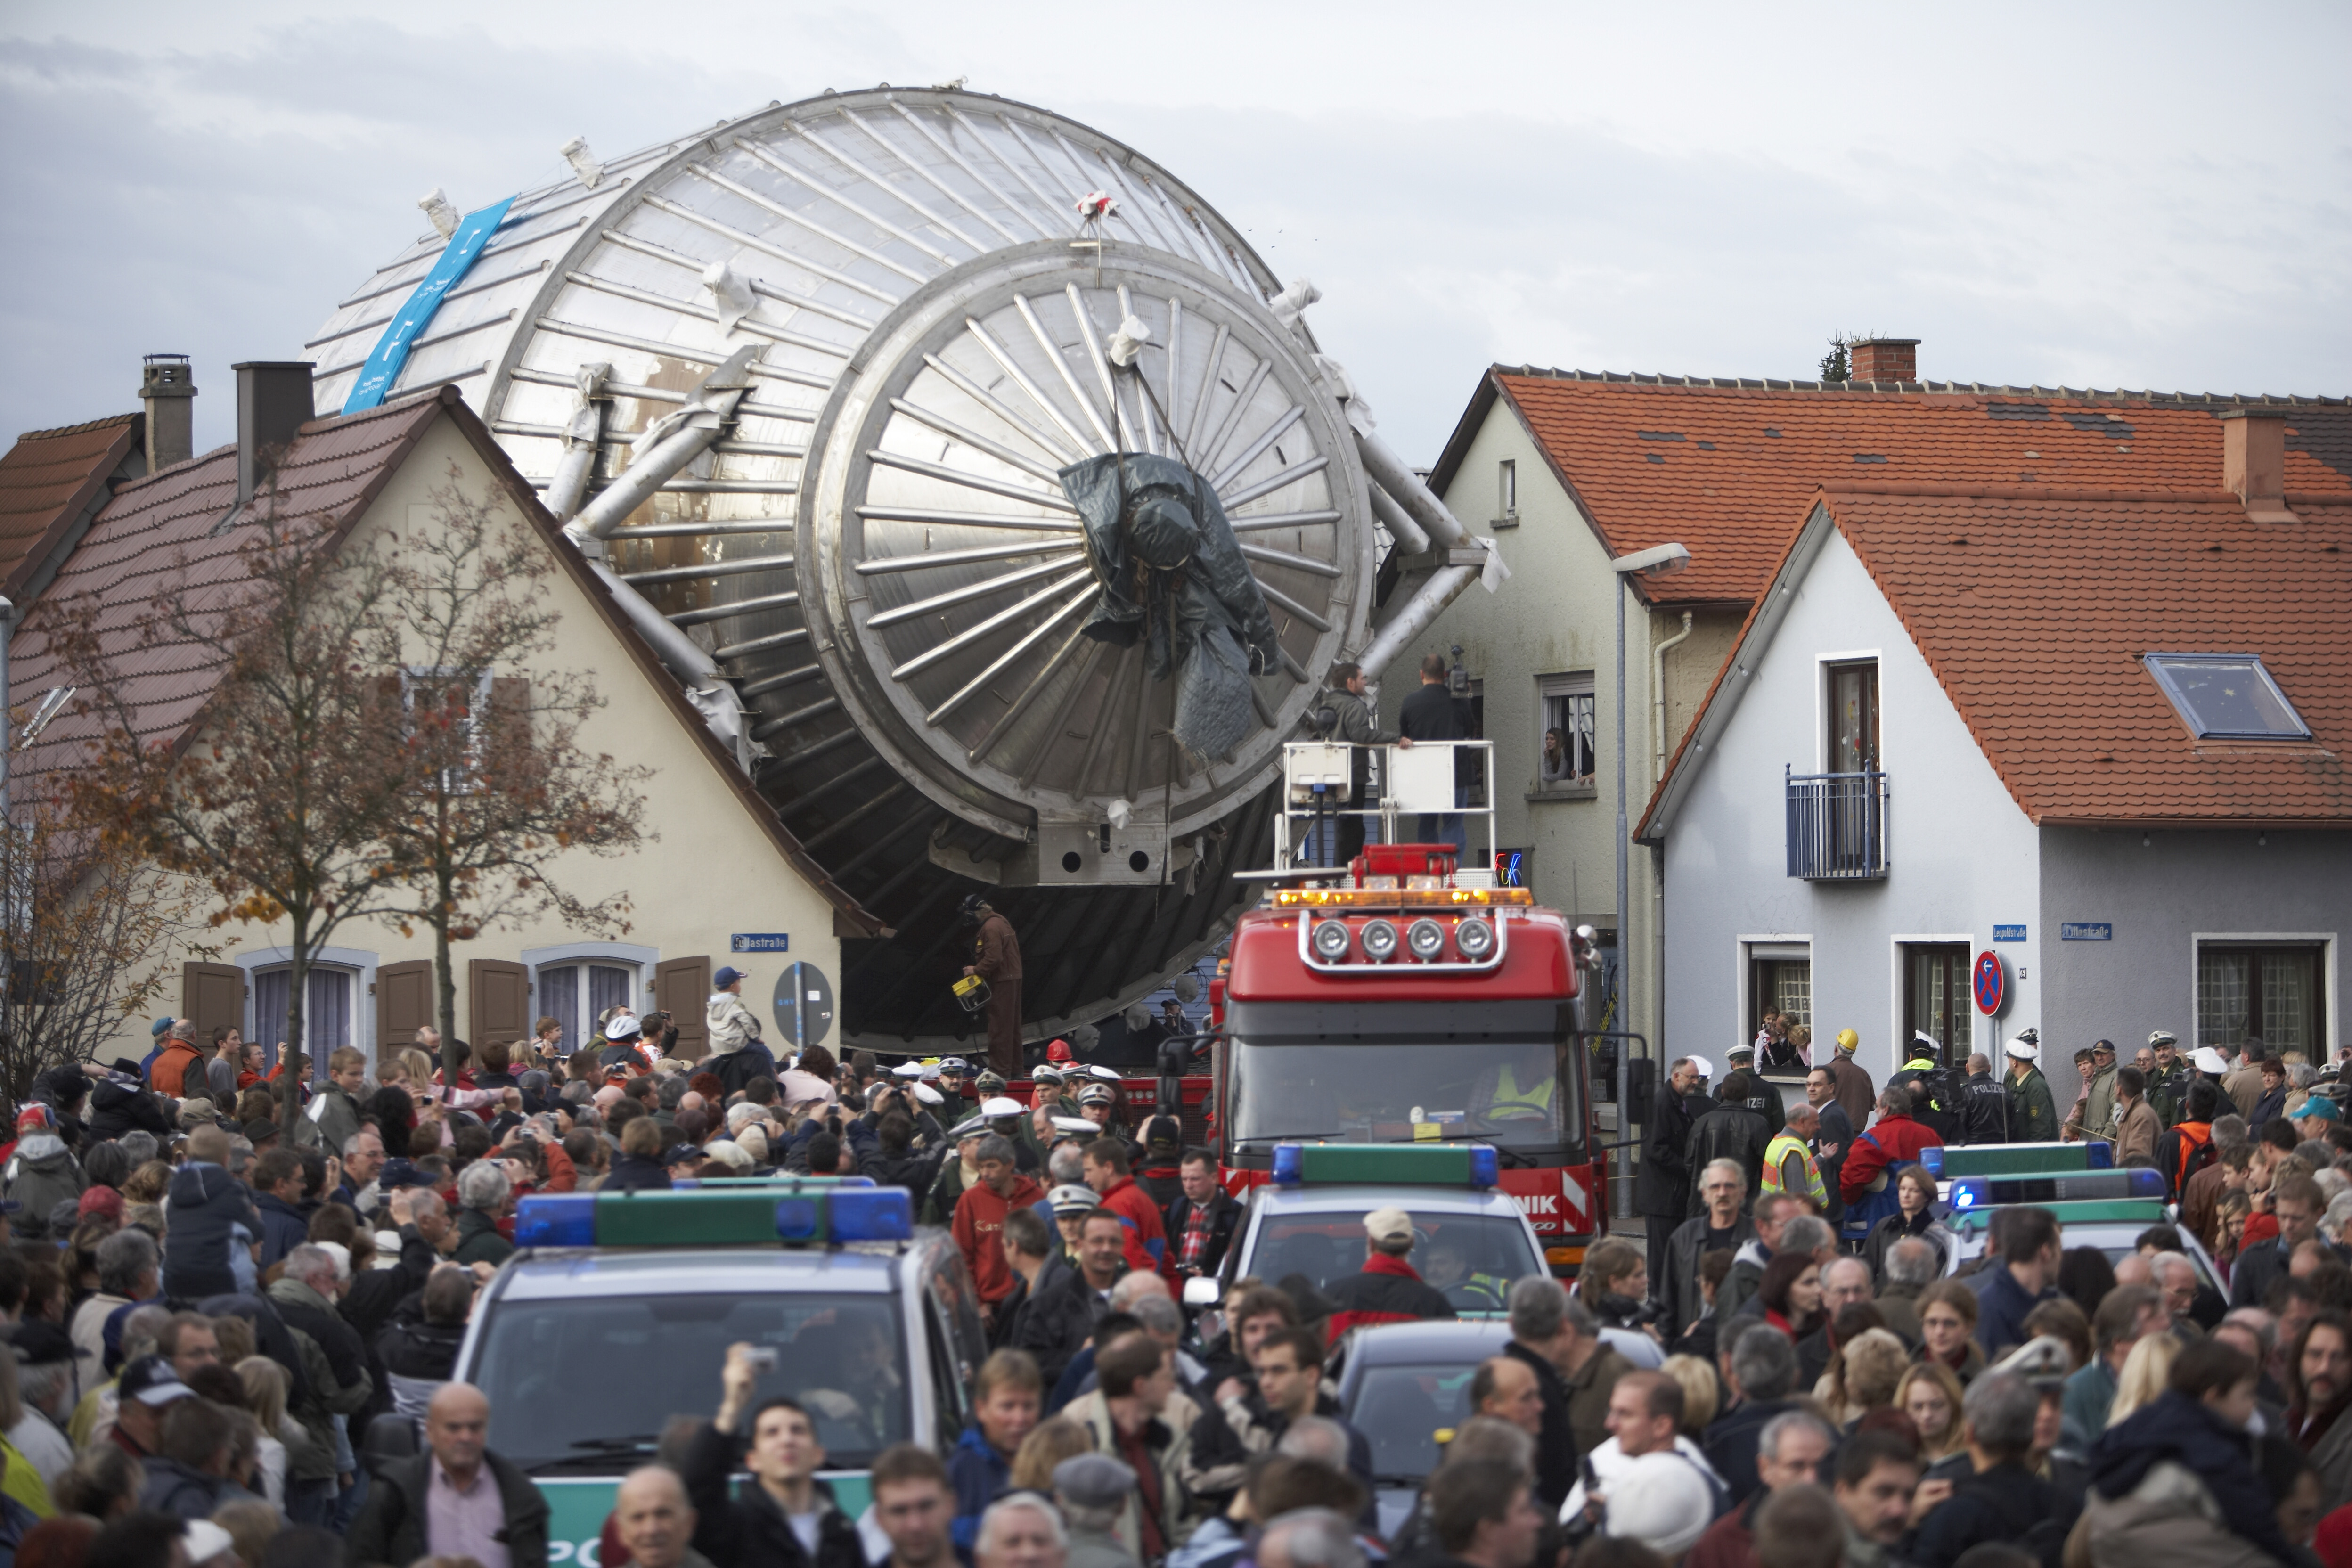 Photo - The spectrometer for the KATRIN experiment, as it works its way through the German town of Eggenstein-Leopoldshafen in 2006 on its way to the nearby Karlsruhe Institute of Technology. (Credit: Karlsruhe Institute of Technology)